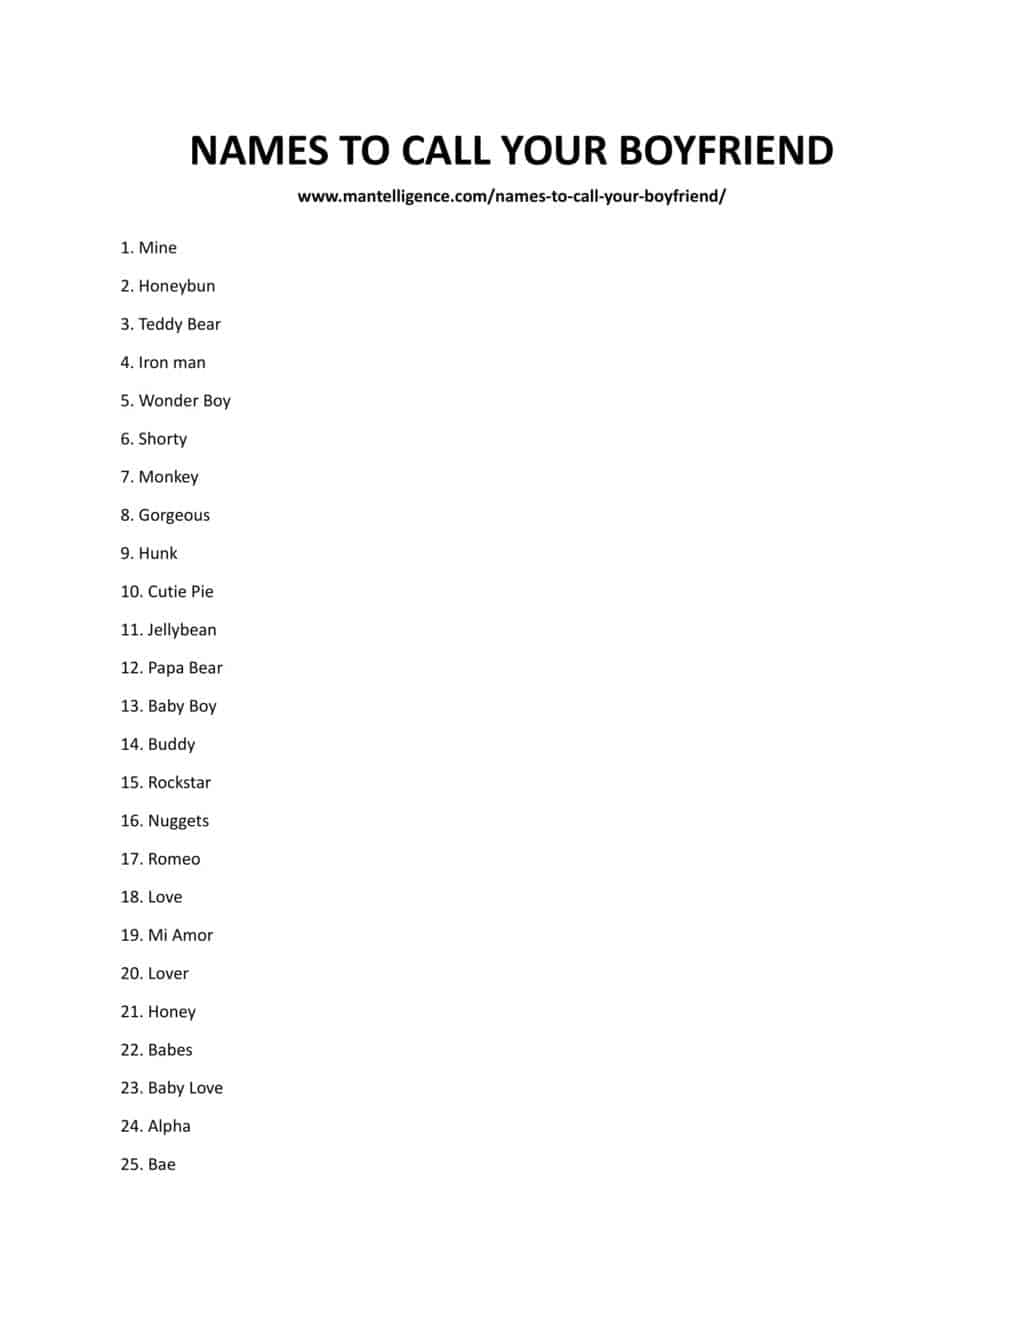 NAMES TO CALL YOUR BOYFRIEND 1 1 1 